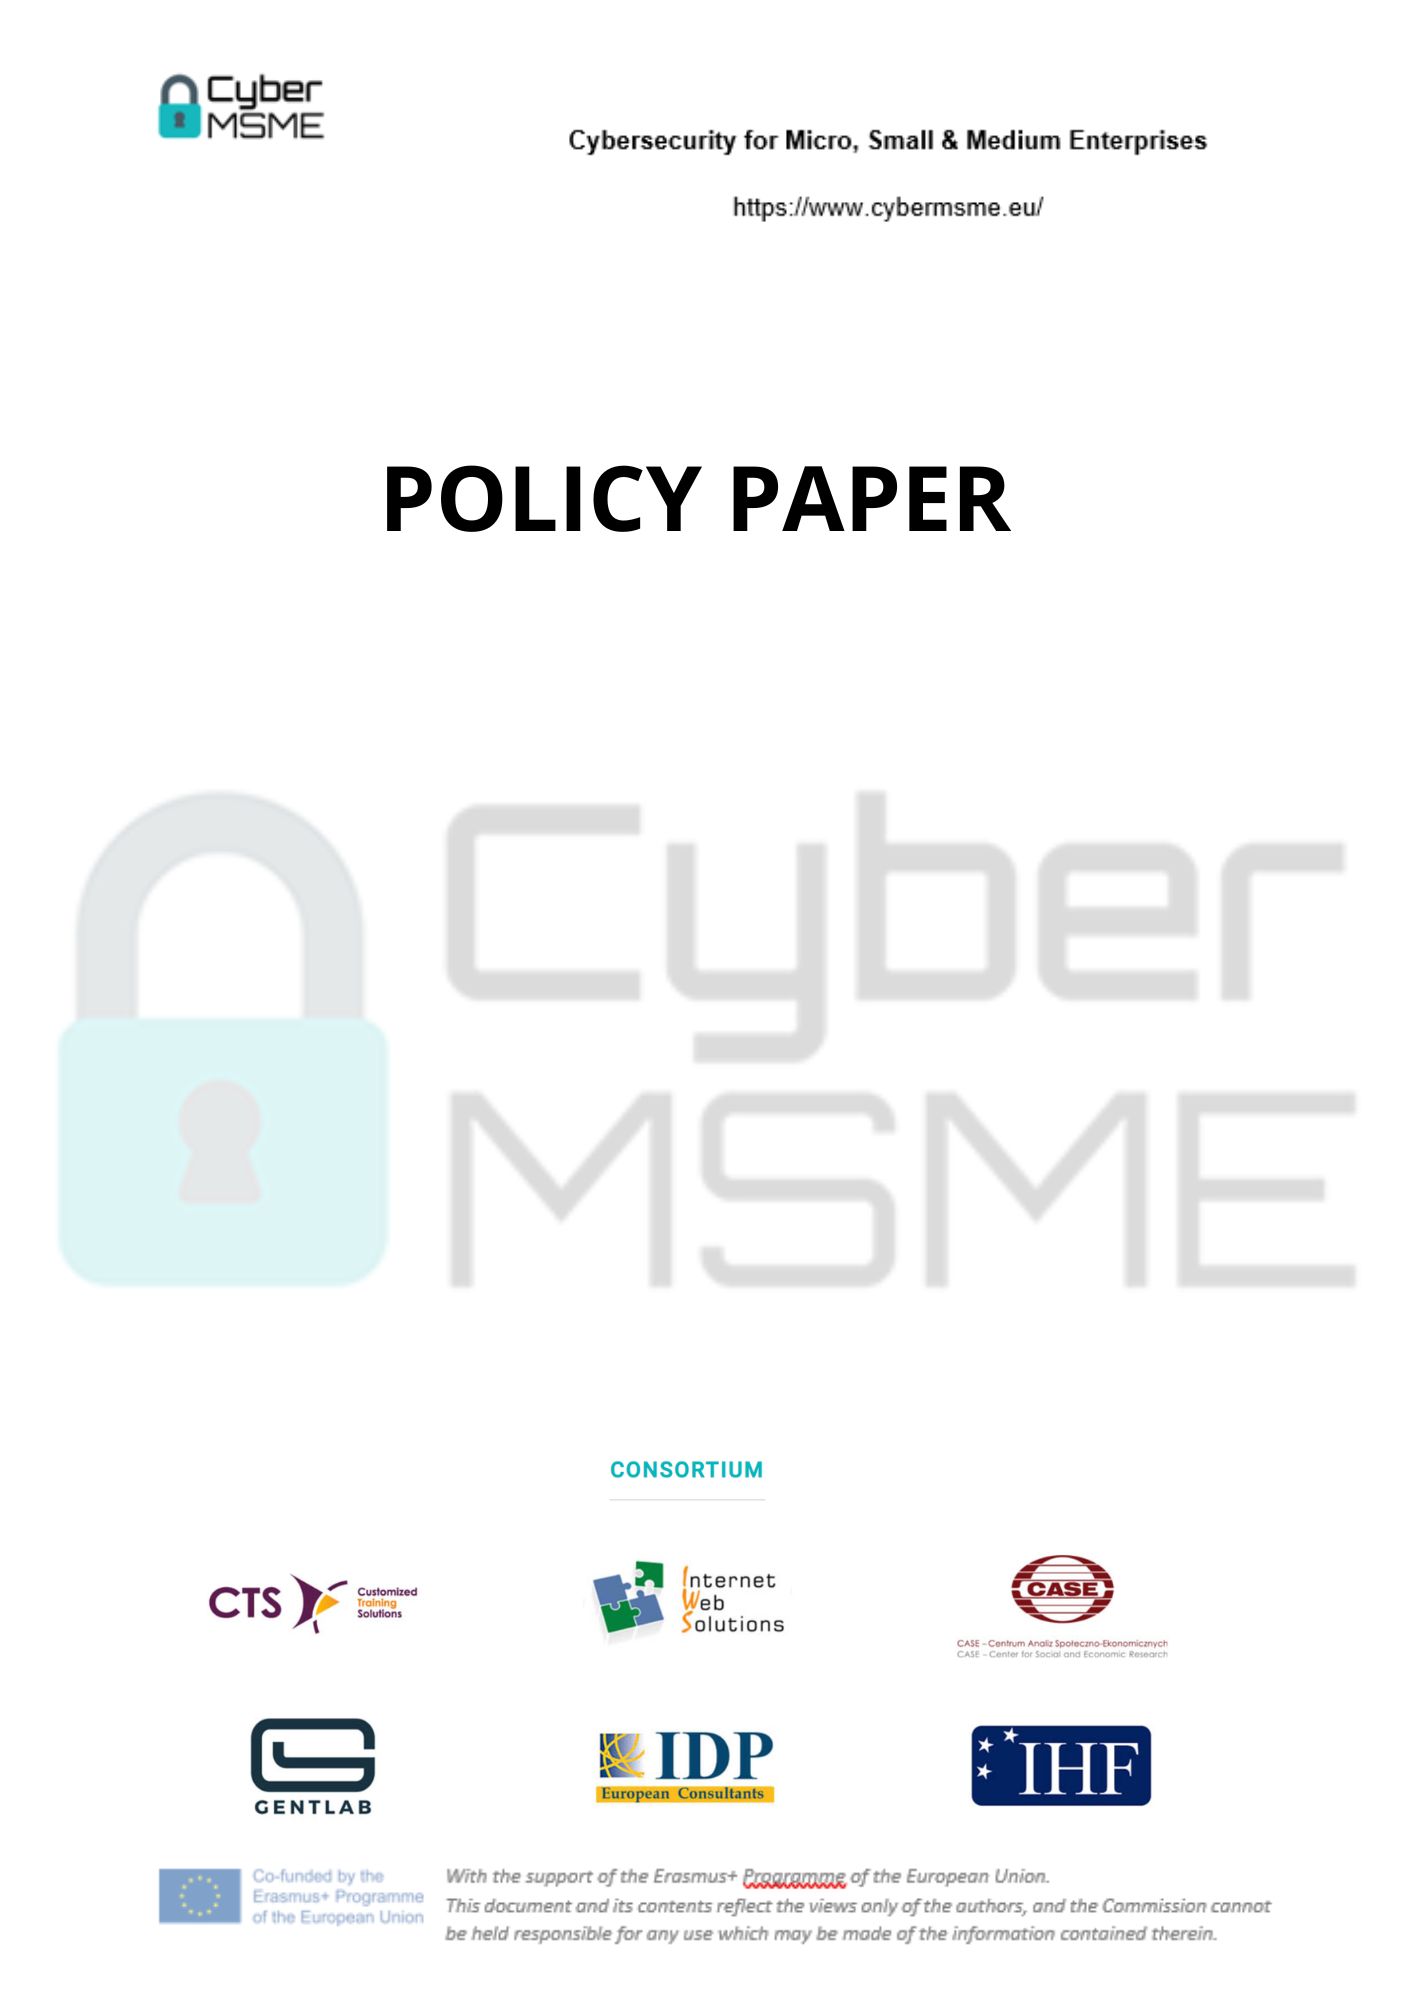 Policy Recommendation for Cyber-readiness of EU small and microenterprises: